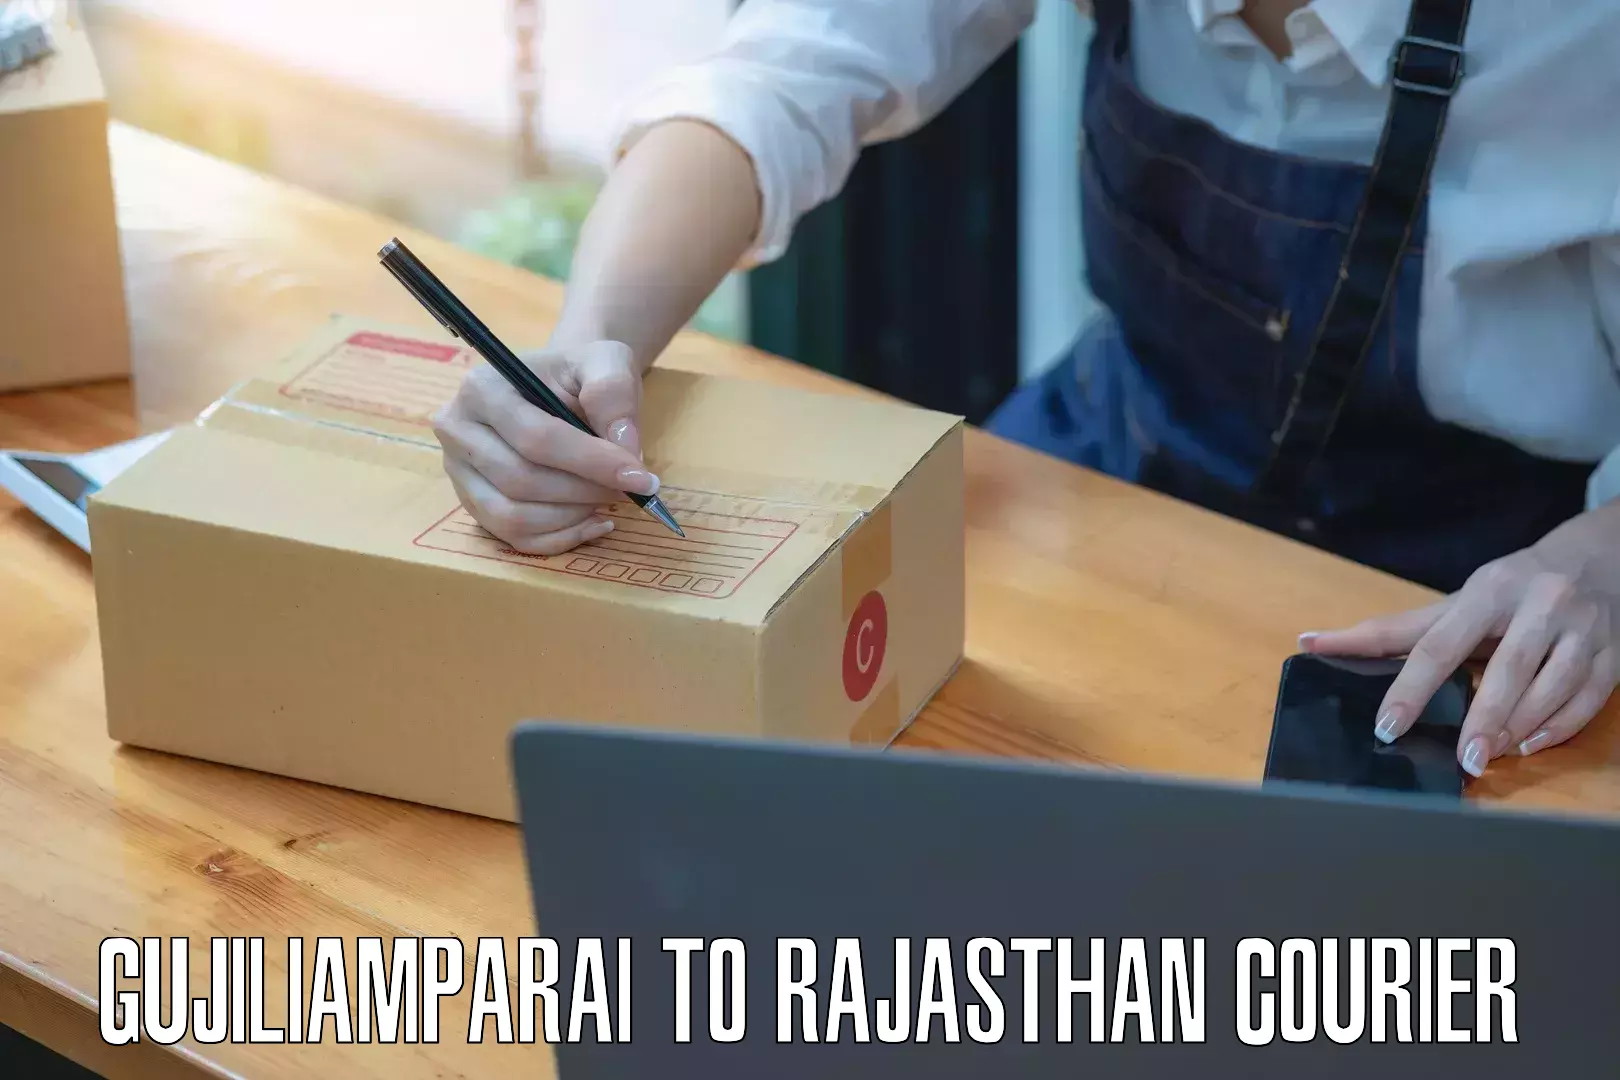 Next-generation courier services Gujiliamparai to Rajasthan